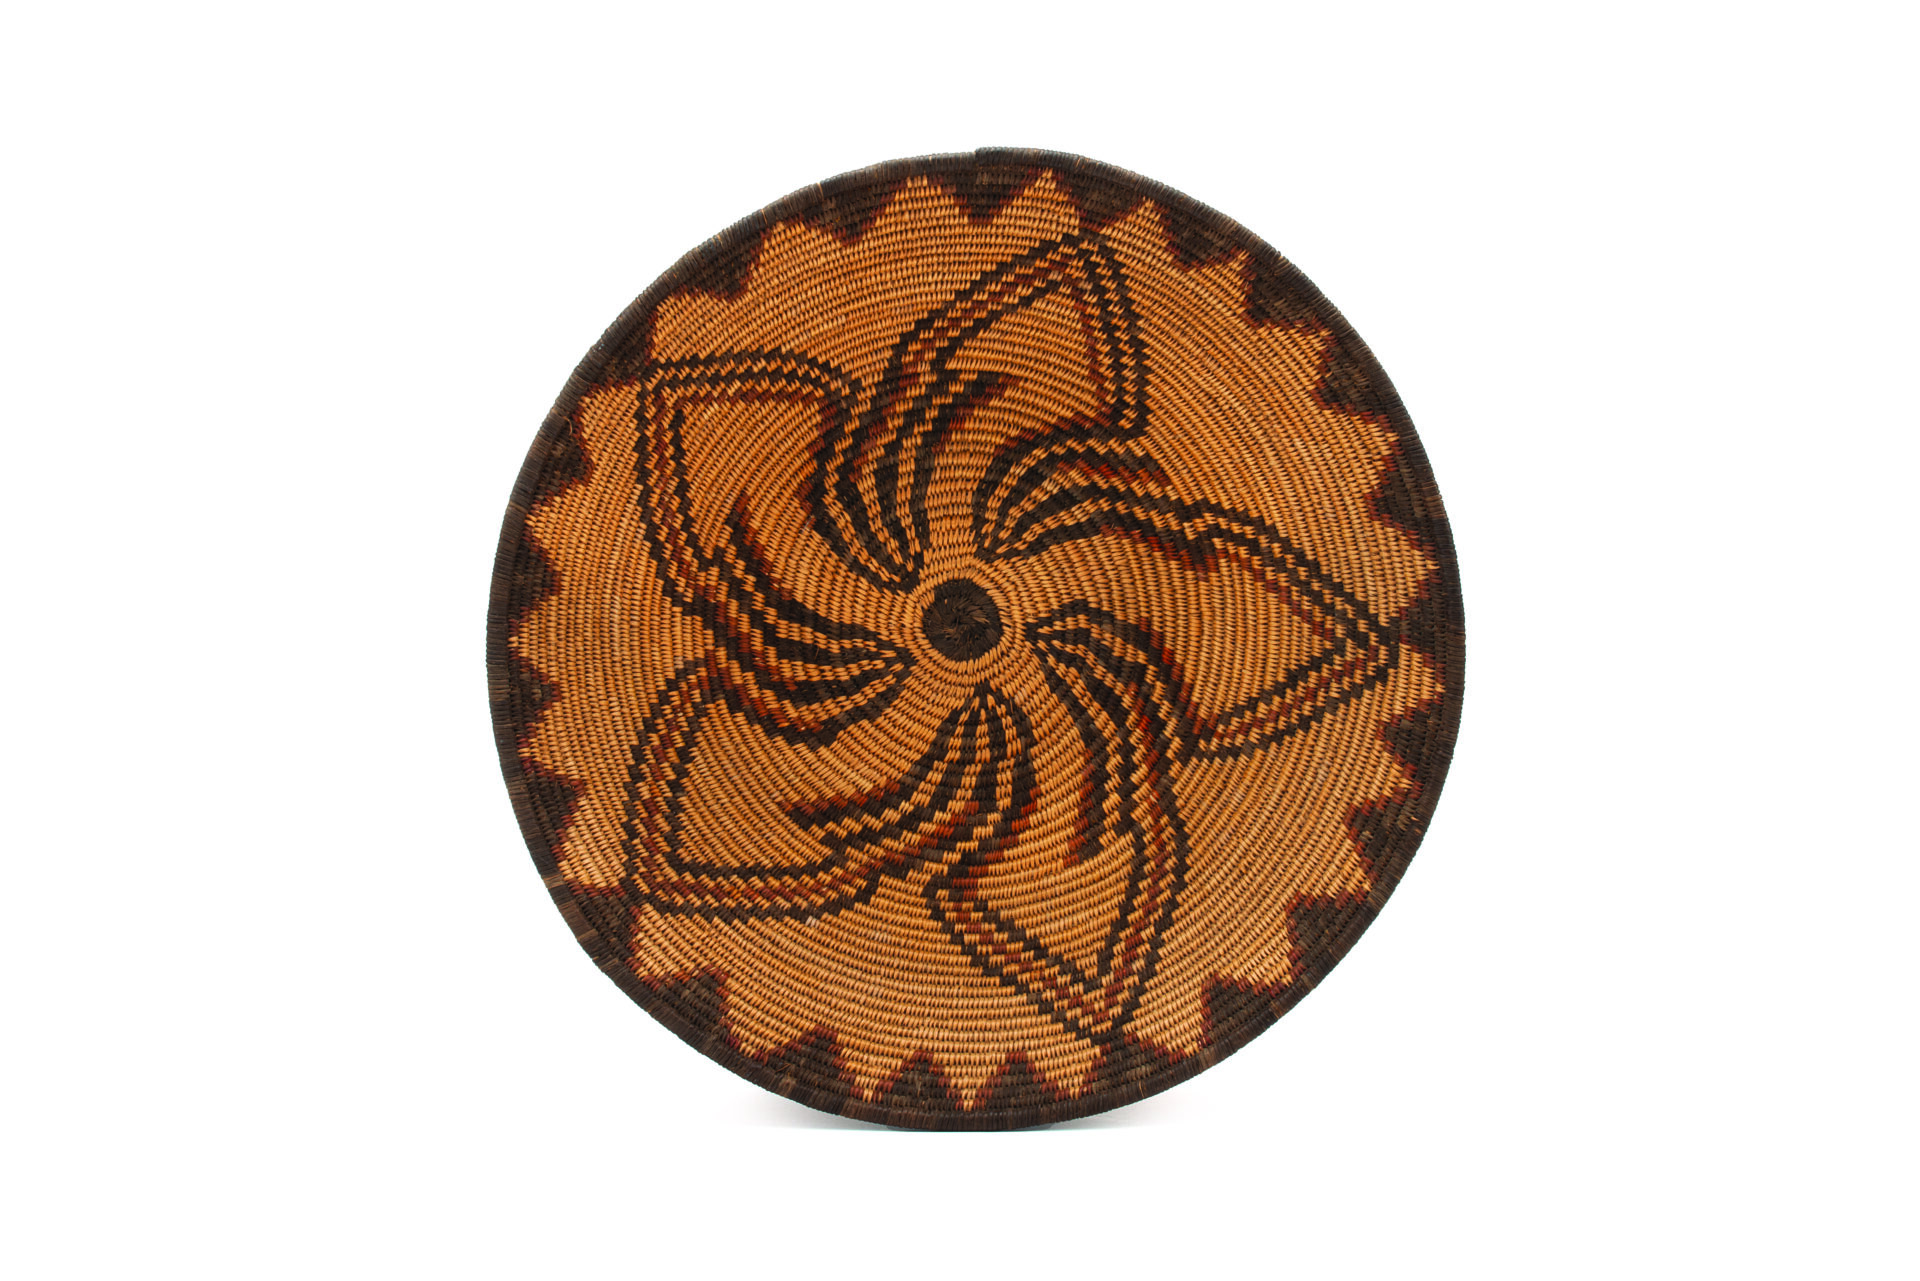 A round woven basket with intricate geometric patterns radiating from the center, featuring alternating triangular and swirling designs in various shades of brown.